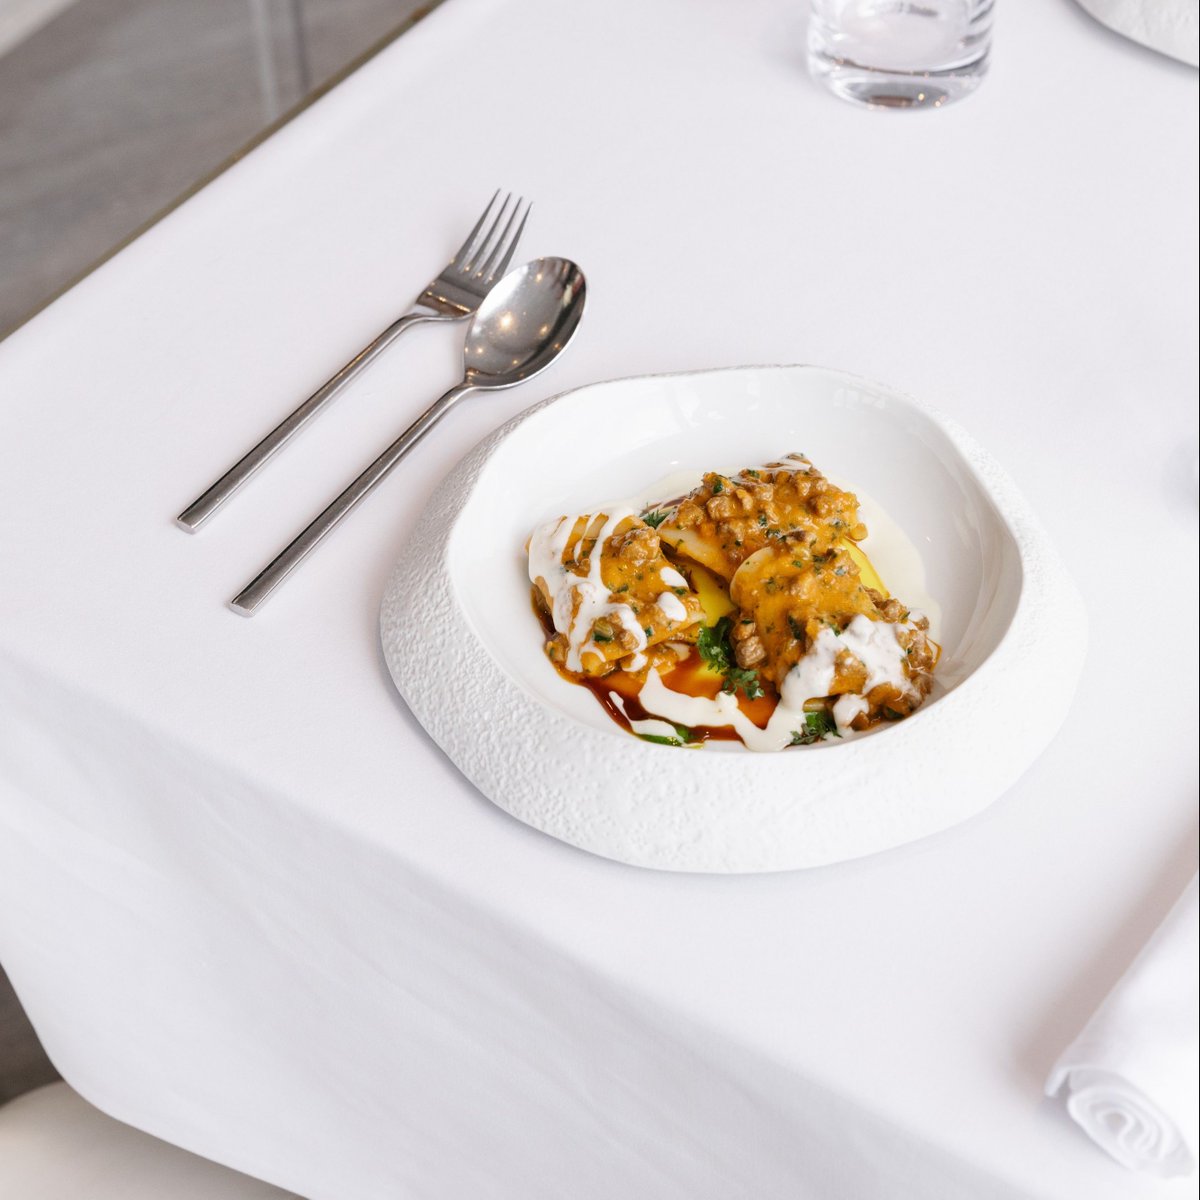 A symphony of textures and flavours of the Amalfi Coast on a plate. Join us at Don Alfonso 1890 to experience the finer things. Reservations at DonAlfonsoToronto.com

#donalfonso1890 #donalfonsotoronto #donalfonso #libertygroup #finedining #luxurydining #michelinstar